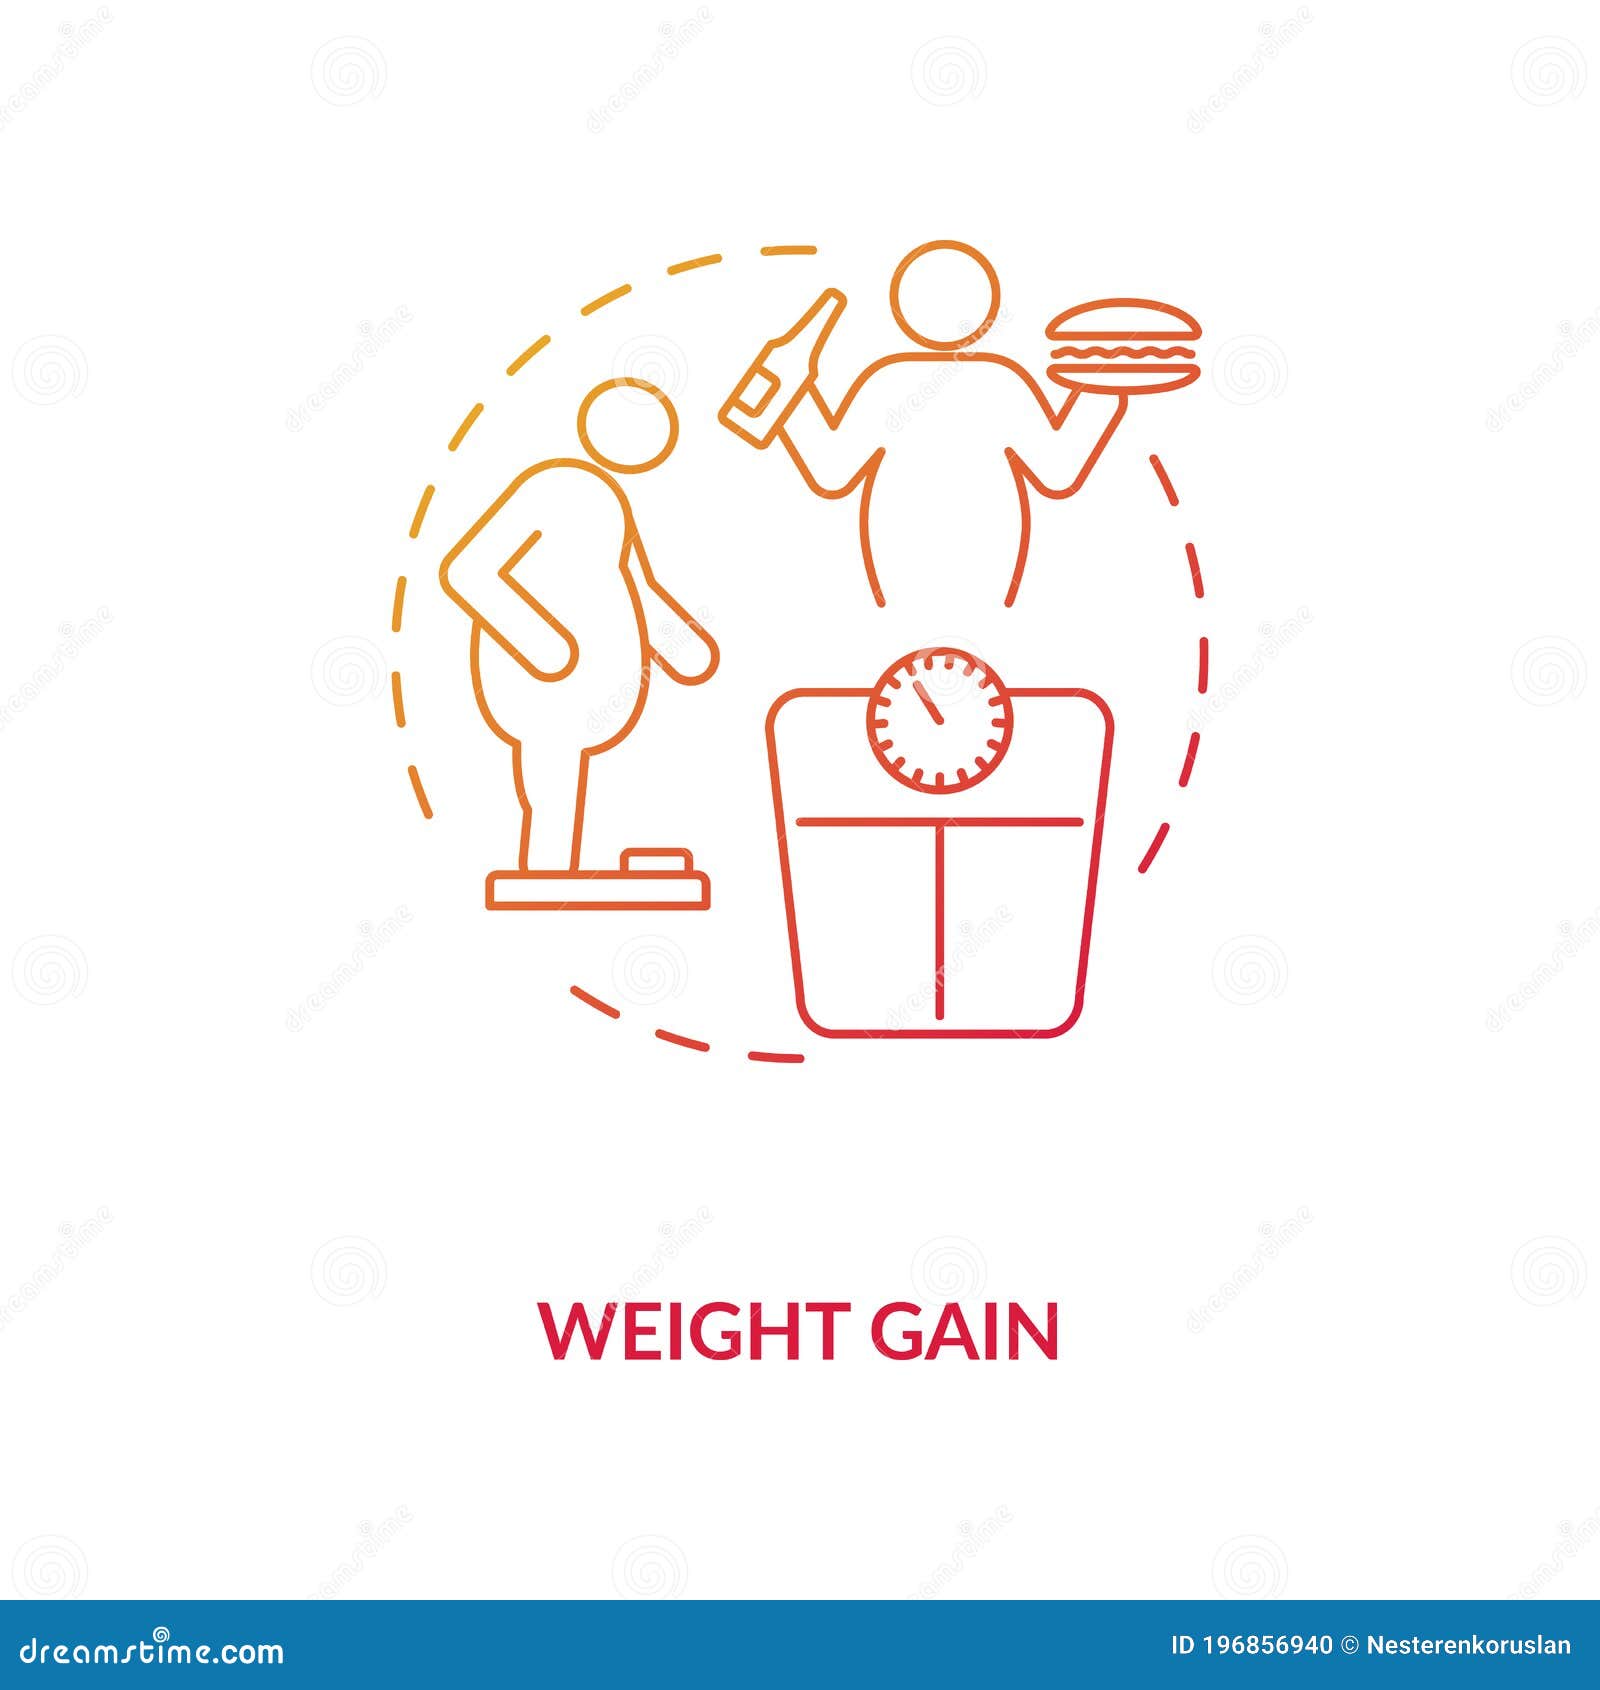 weight gain concept icon